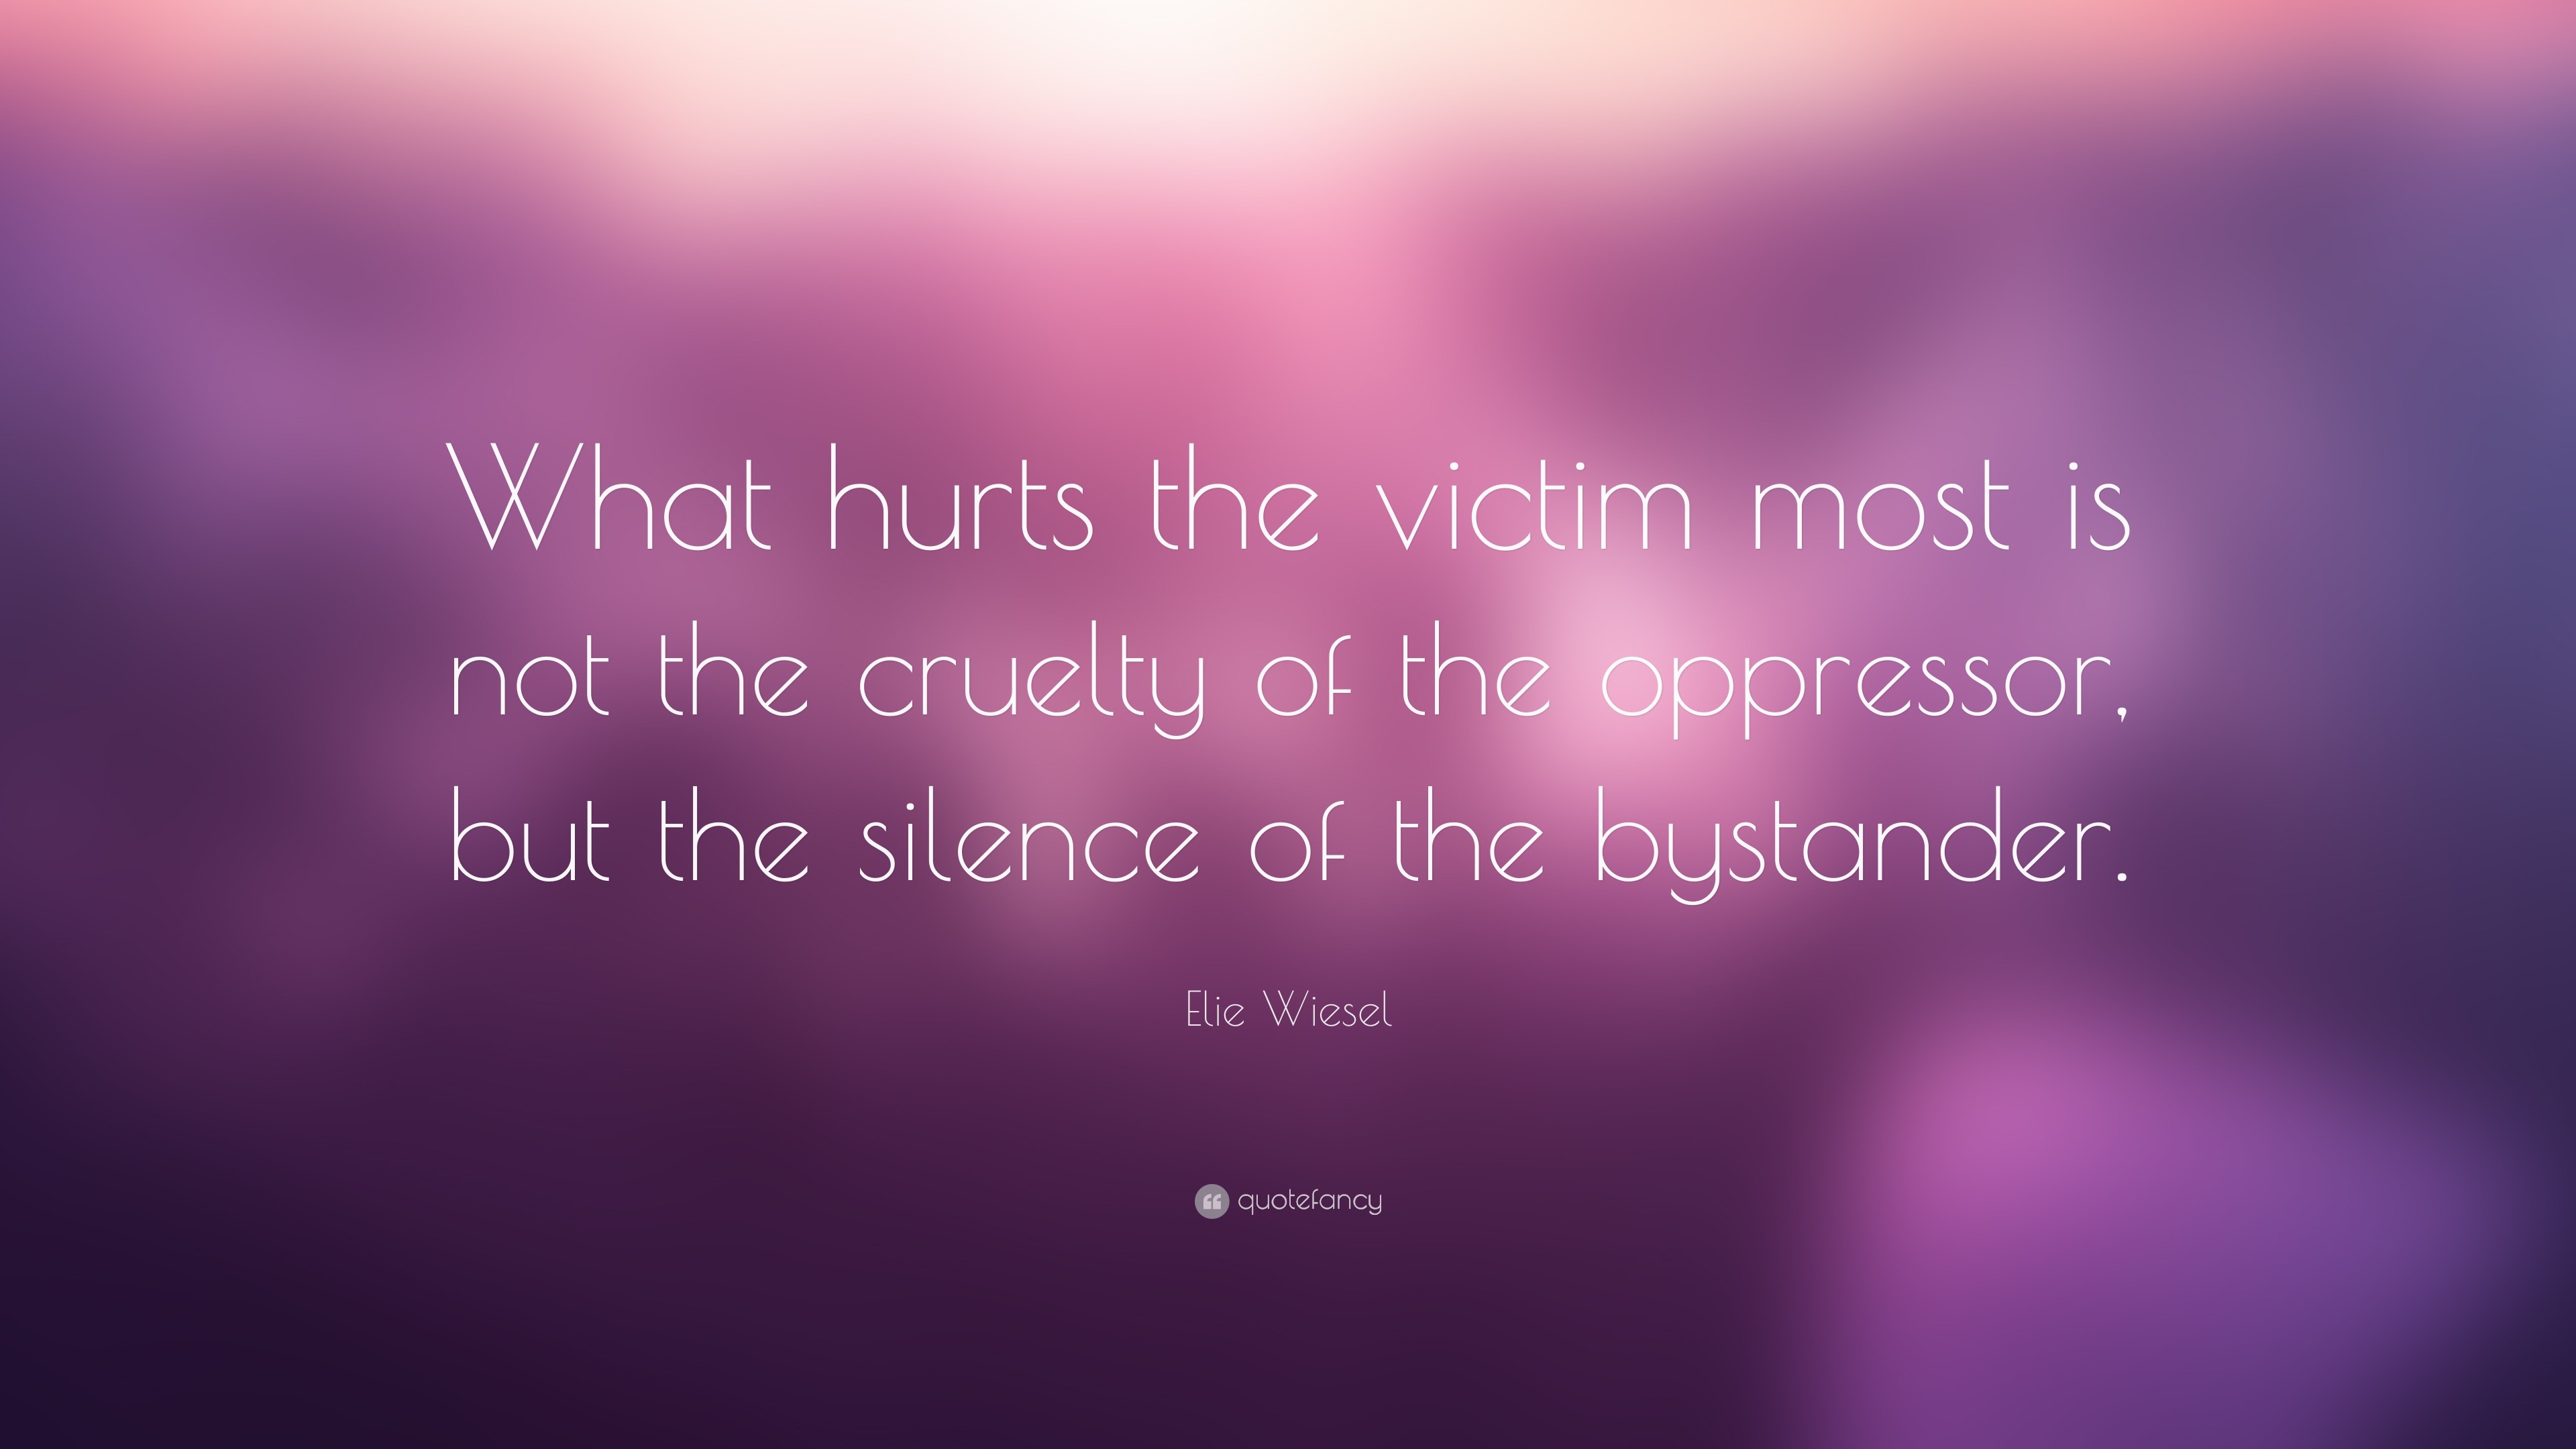 59036 Elie Wiesel Quote What hurts the victim most is not the cruelty of